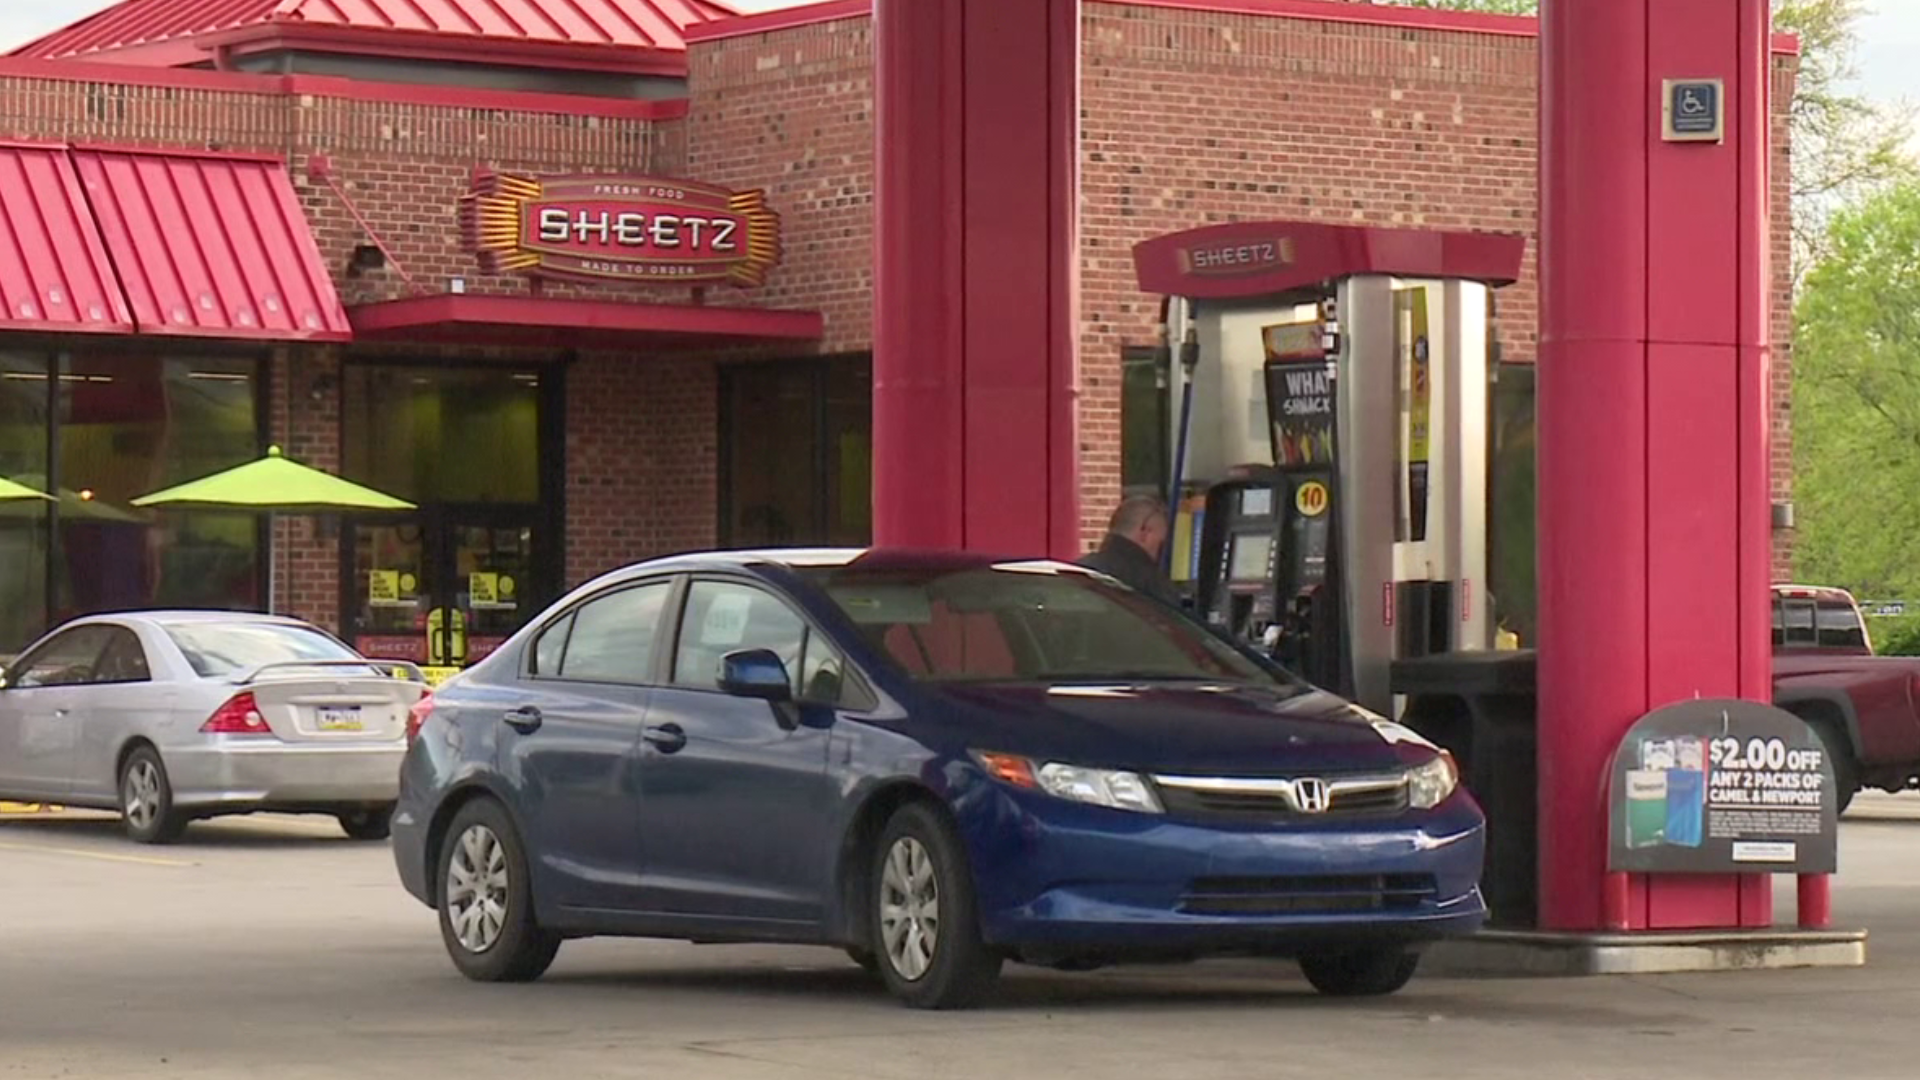 Starting May 21, all 18,000 employees at Sheetz will earn $2 more.